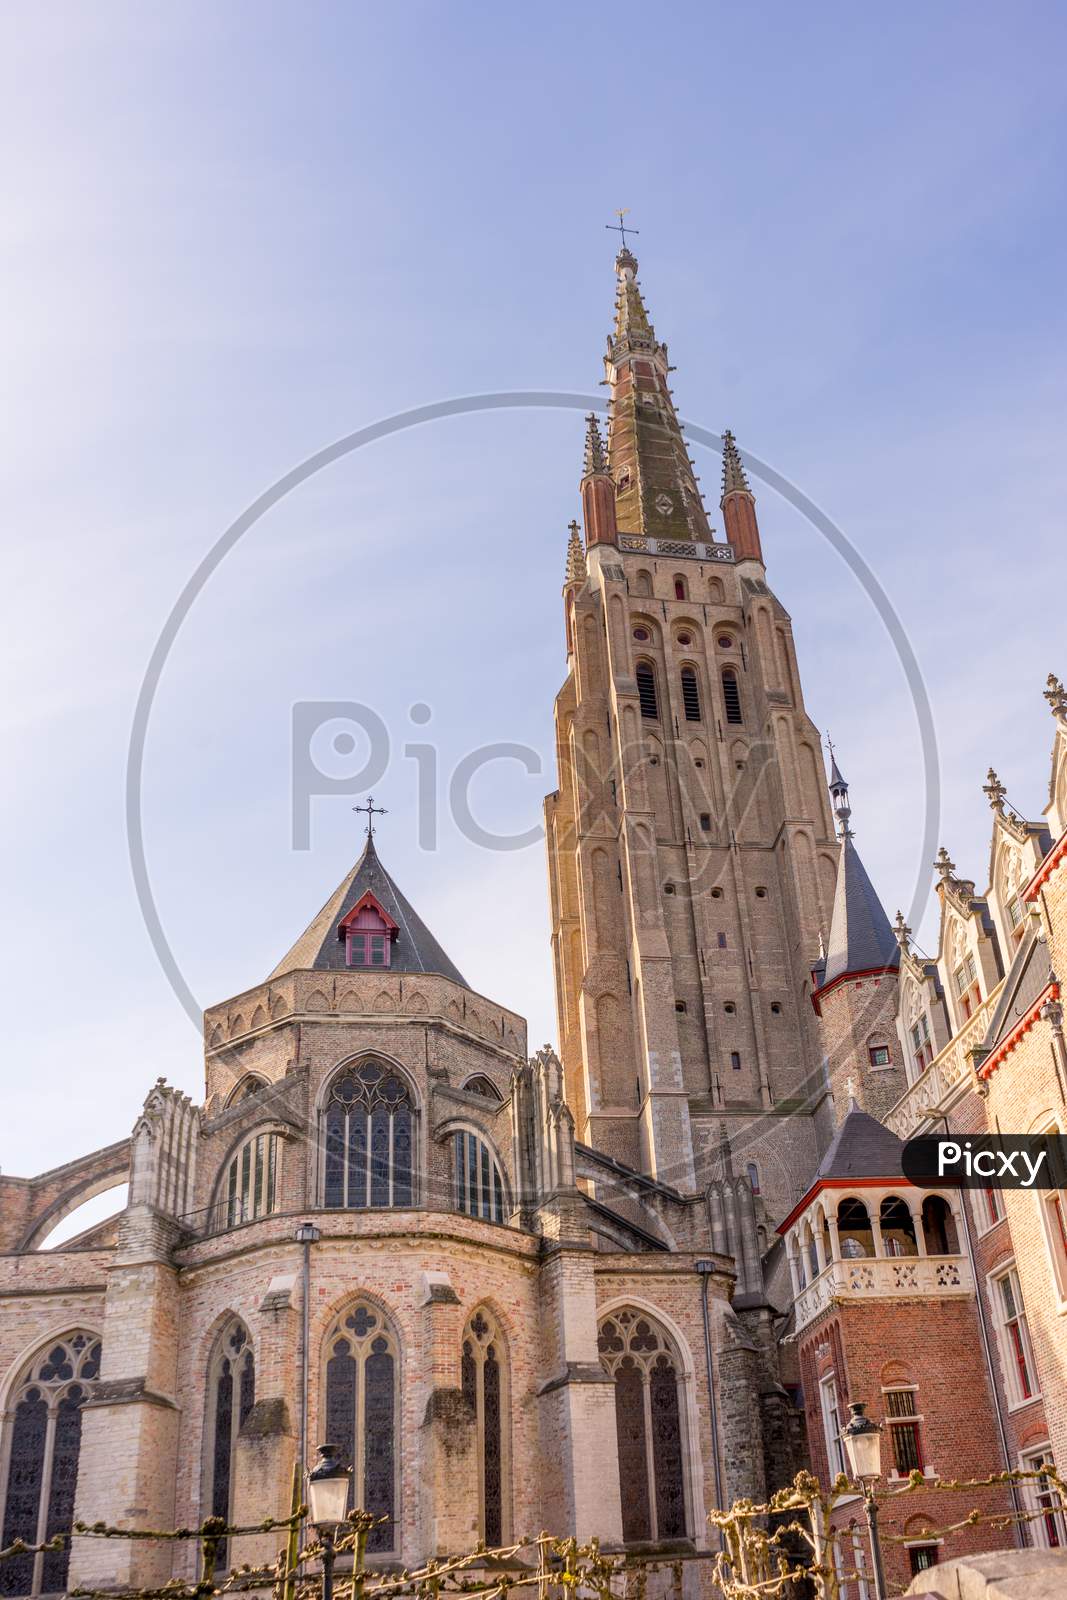 Belgium, Bruges, The Church Of Our Lady In Brugge